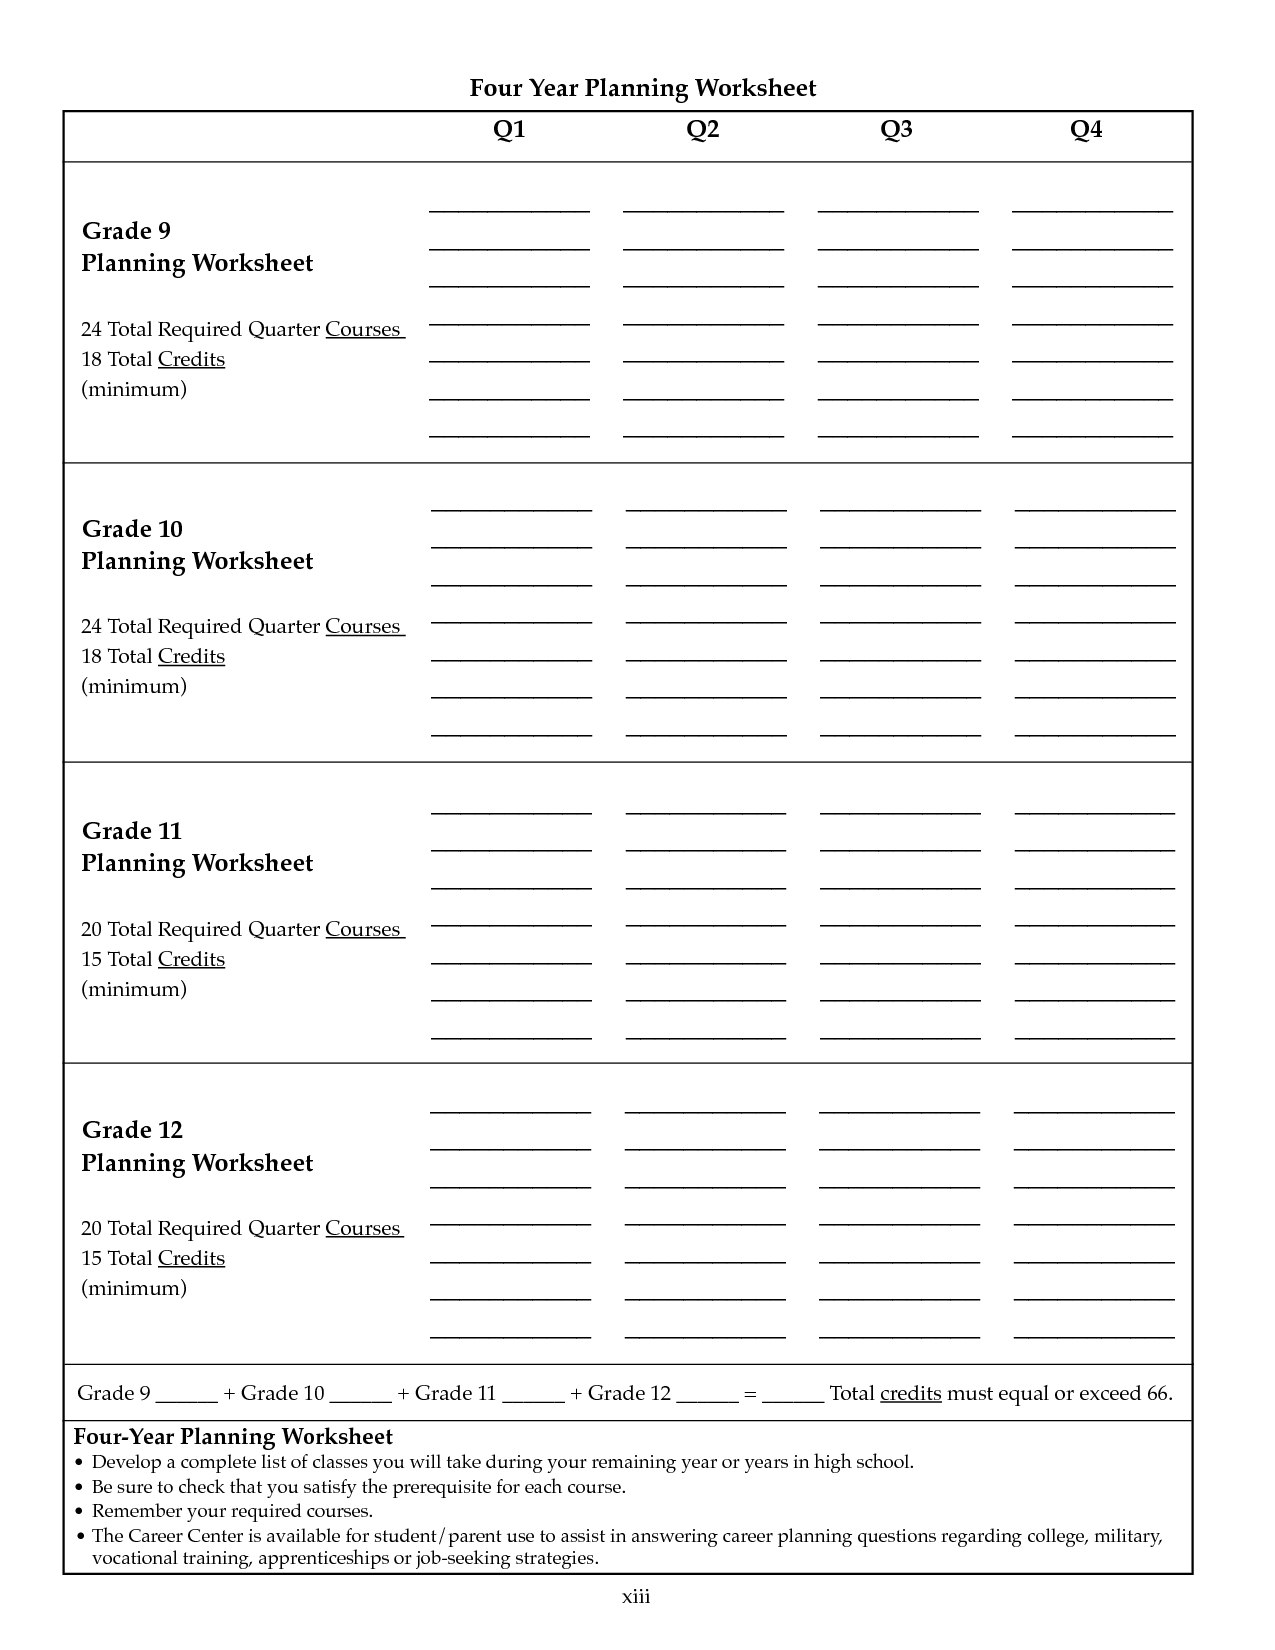 Four-Year Course Planning Worksheet